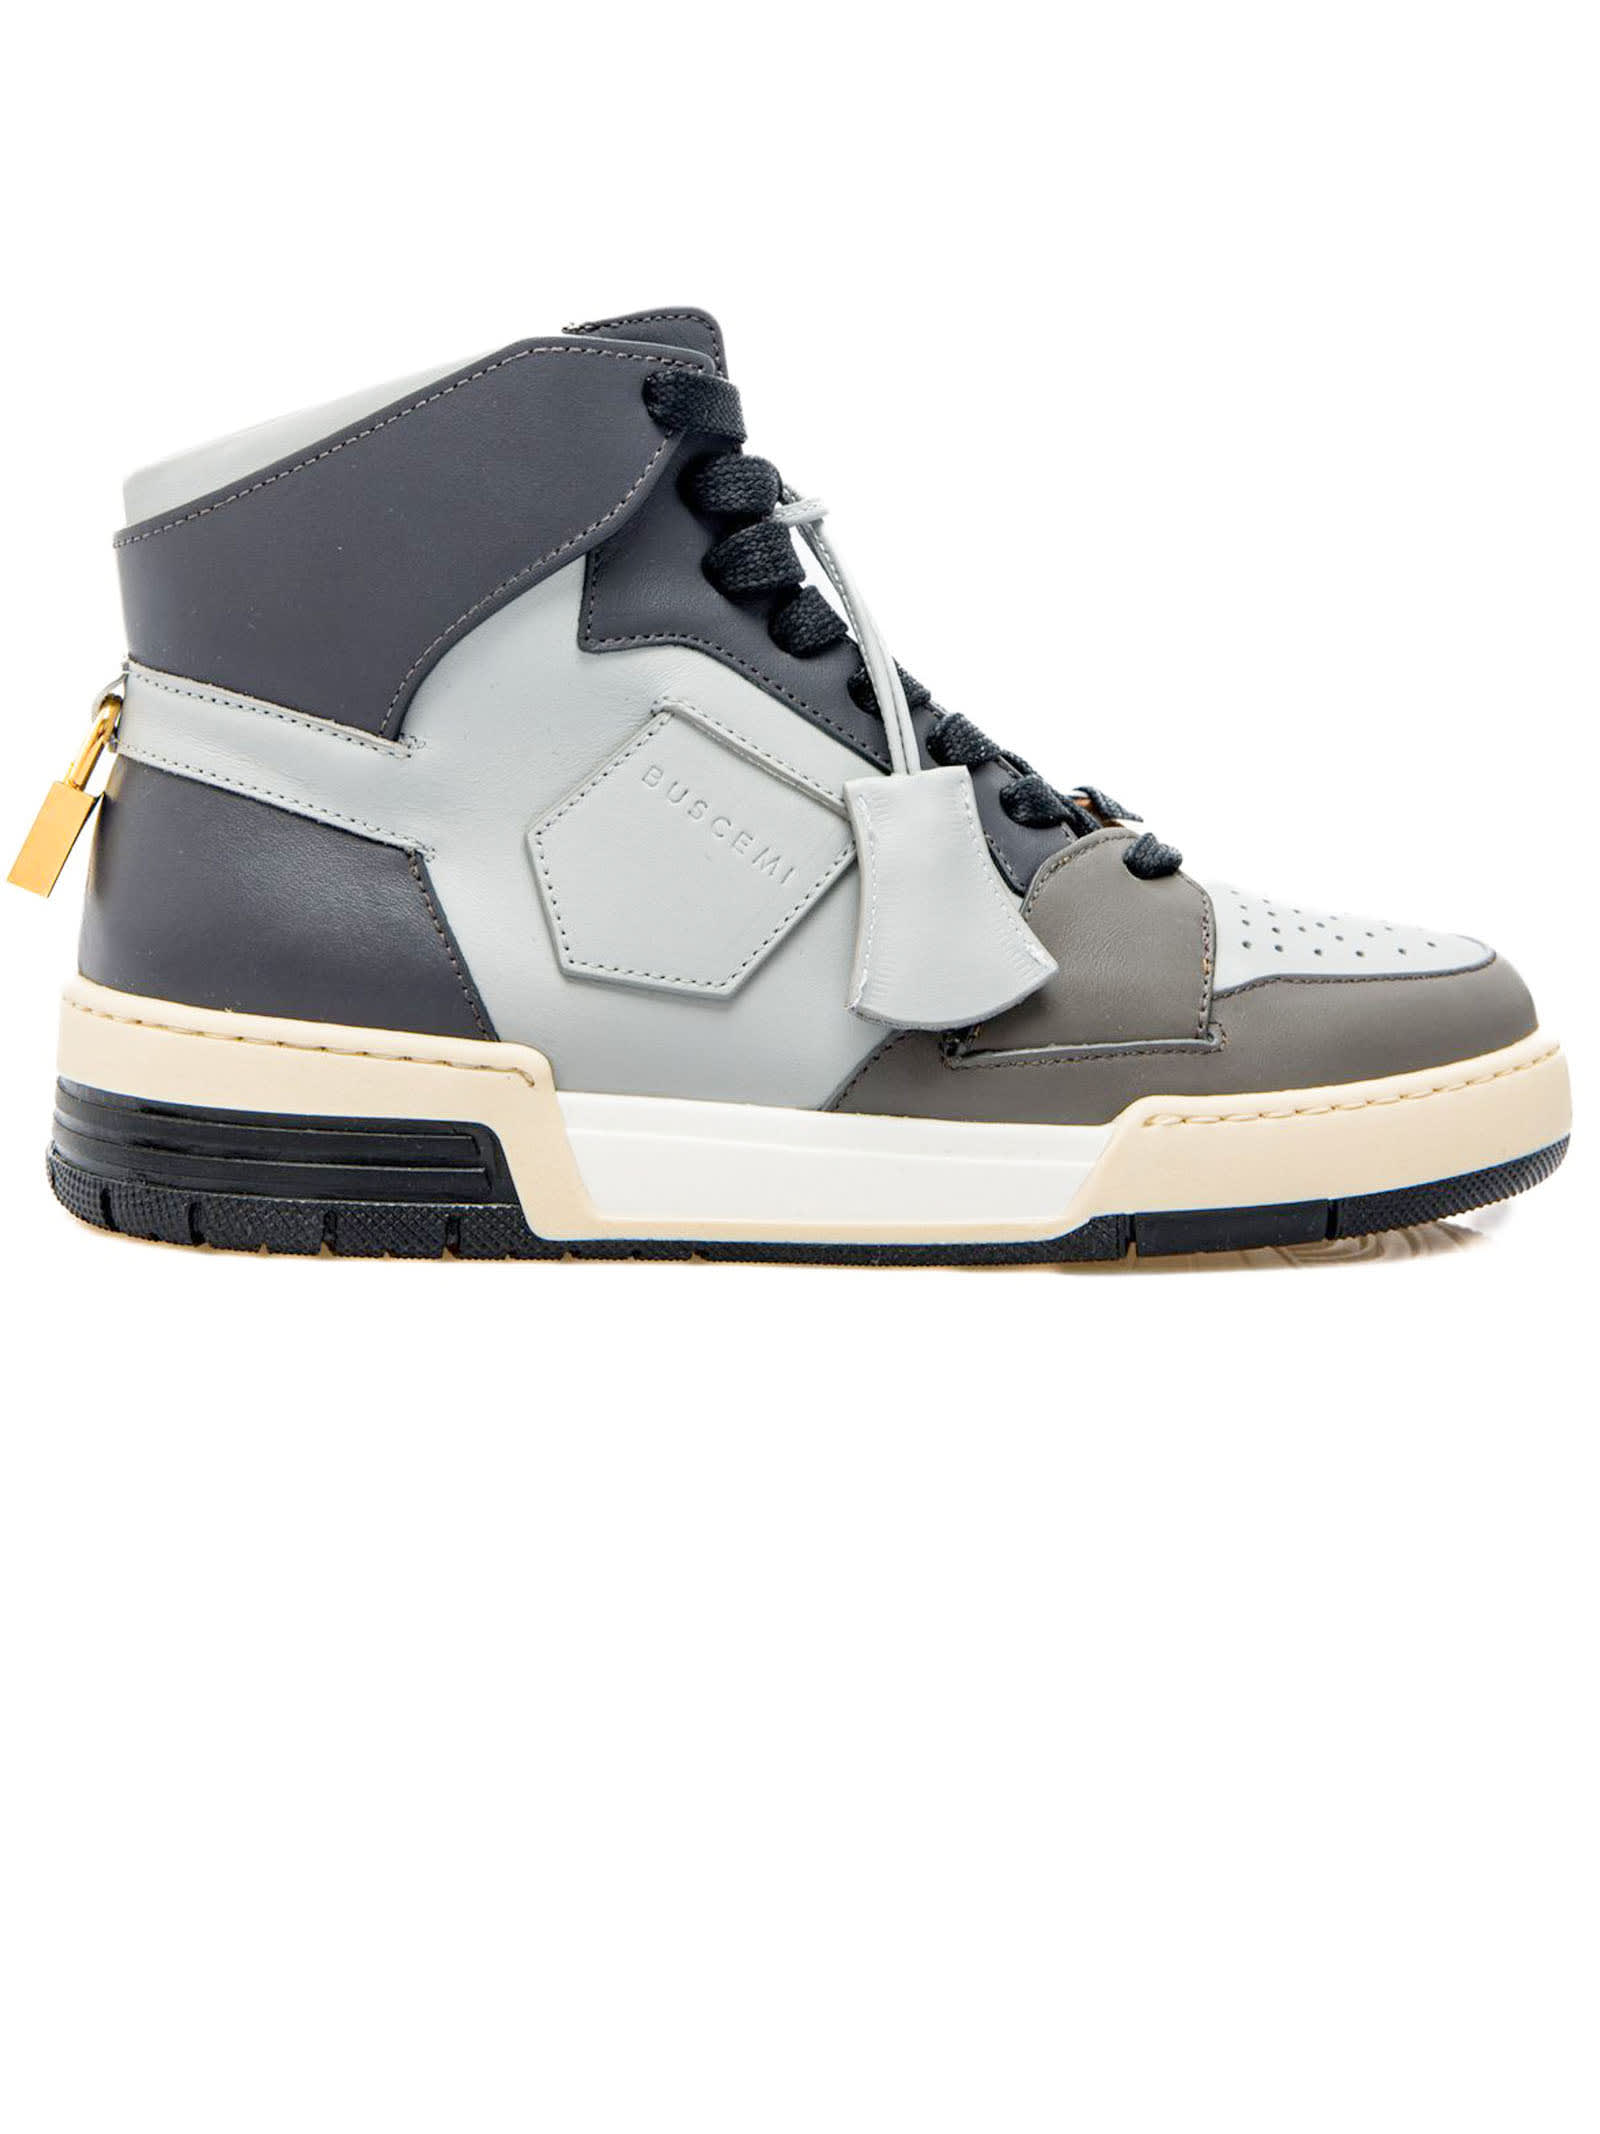 Buscemi Grey And Black Leather Sneakers